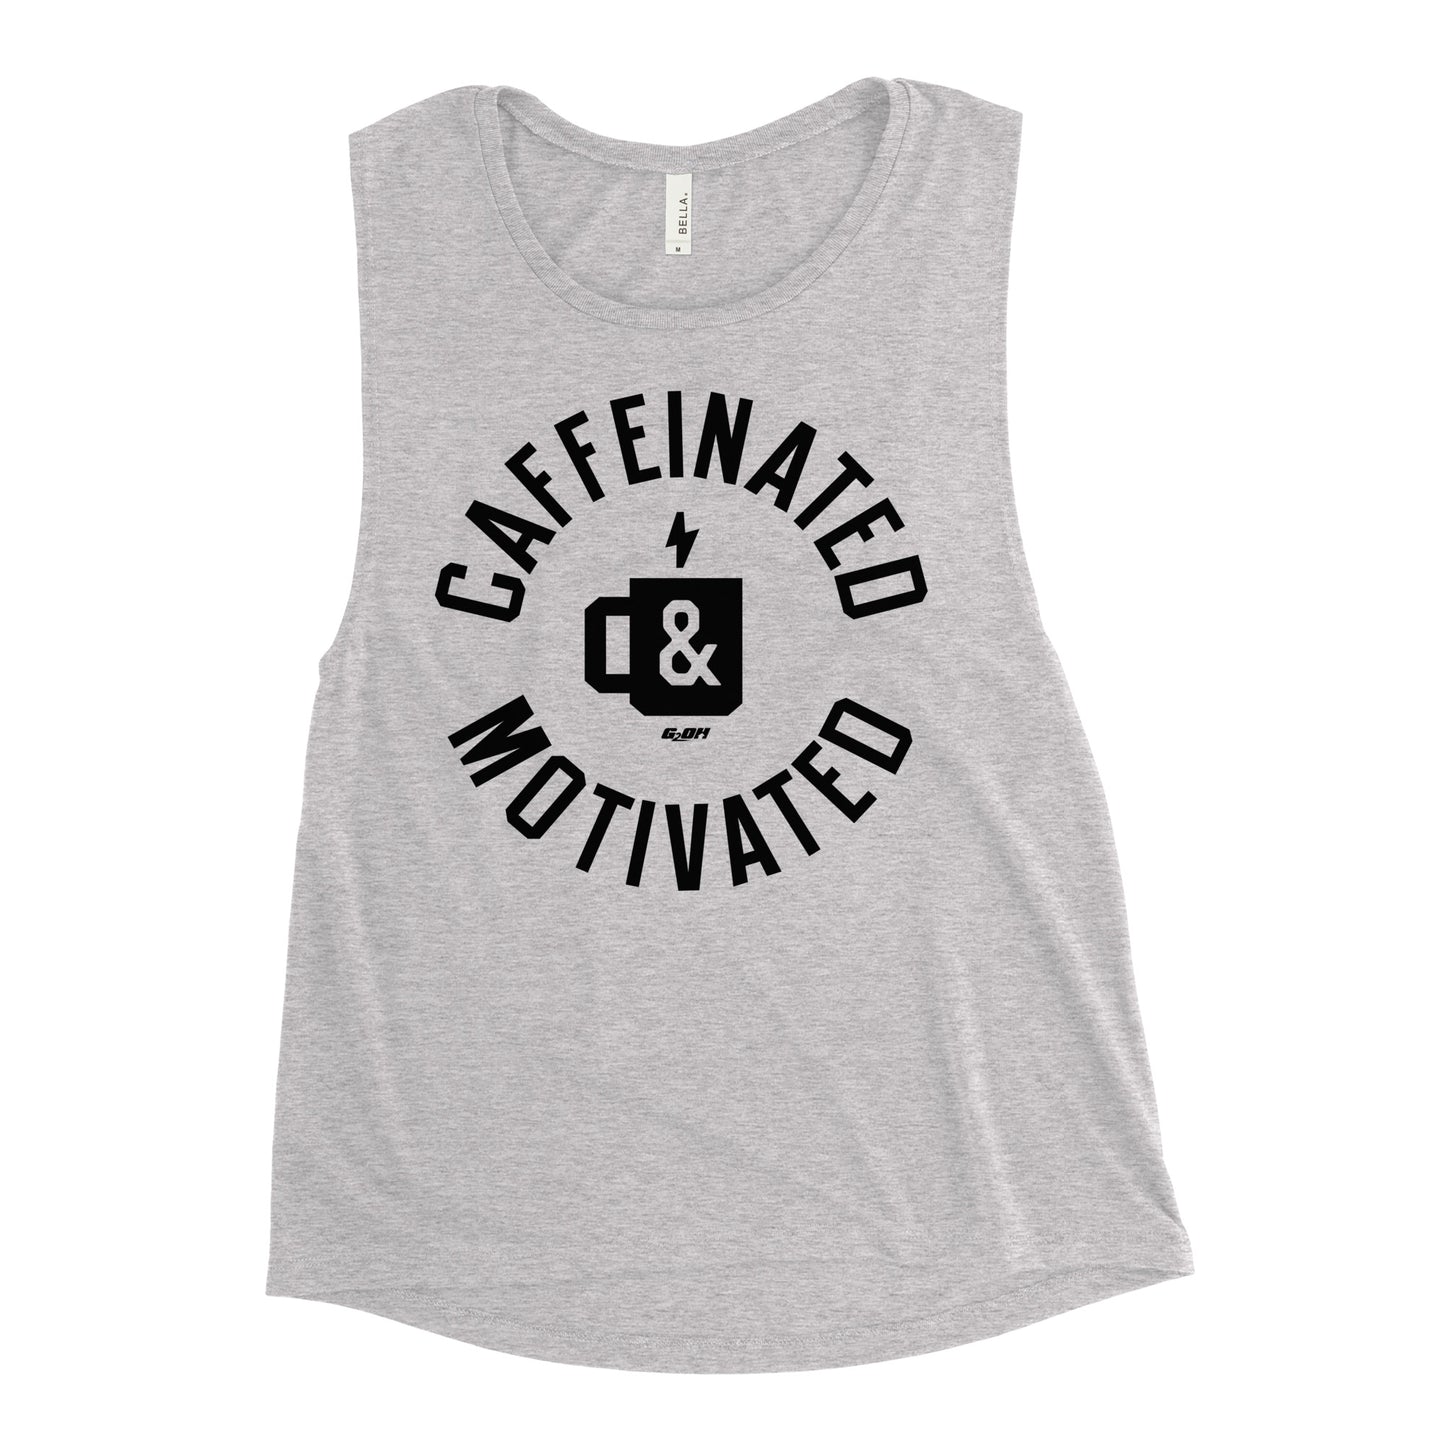 Caffeinated And Motivated Women's Muscle Tank